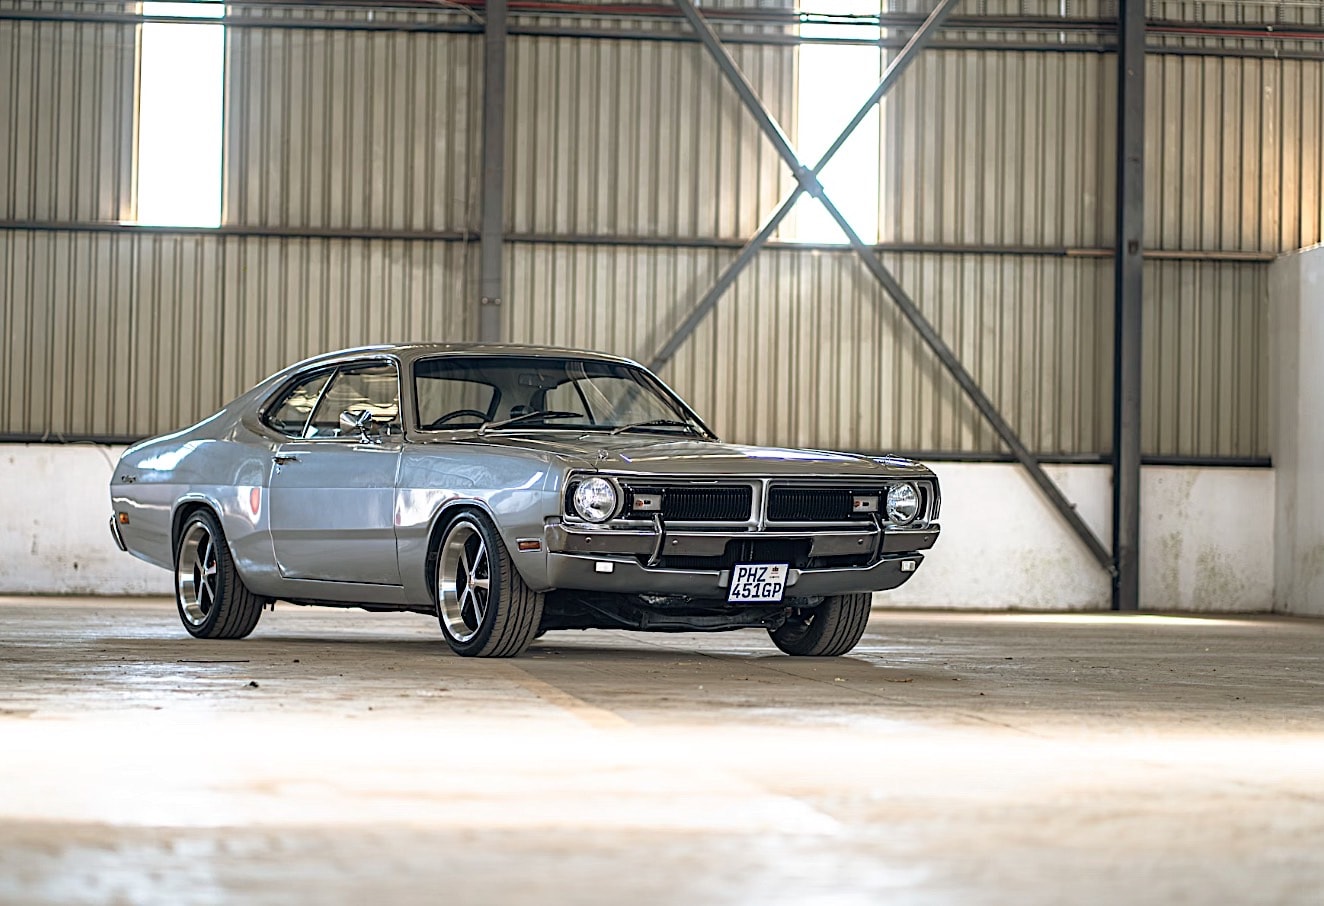 Dodge Charger's Global Legacy